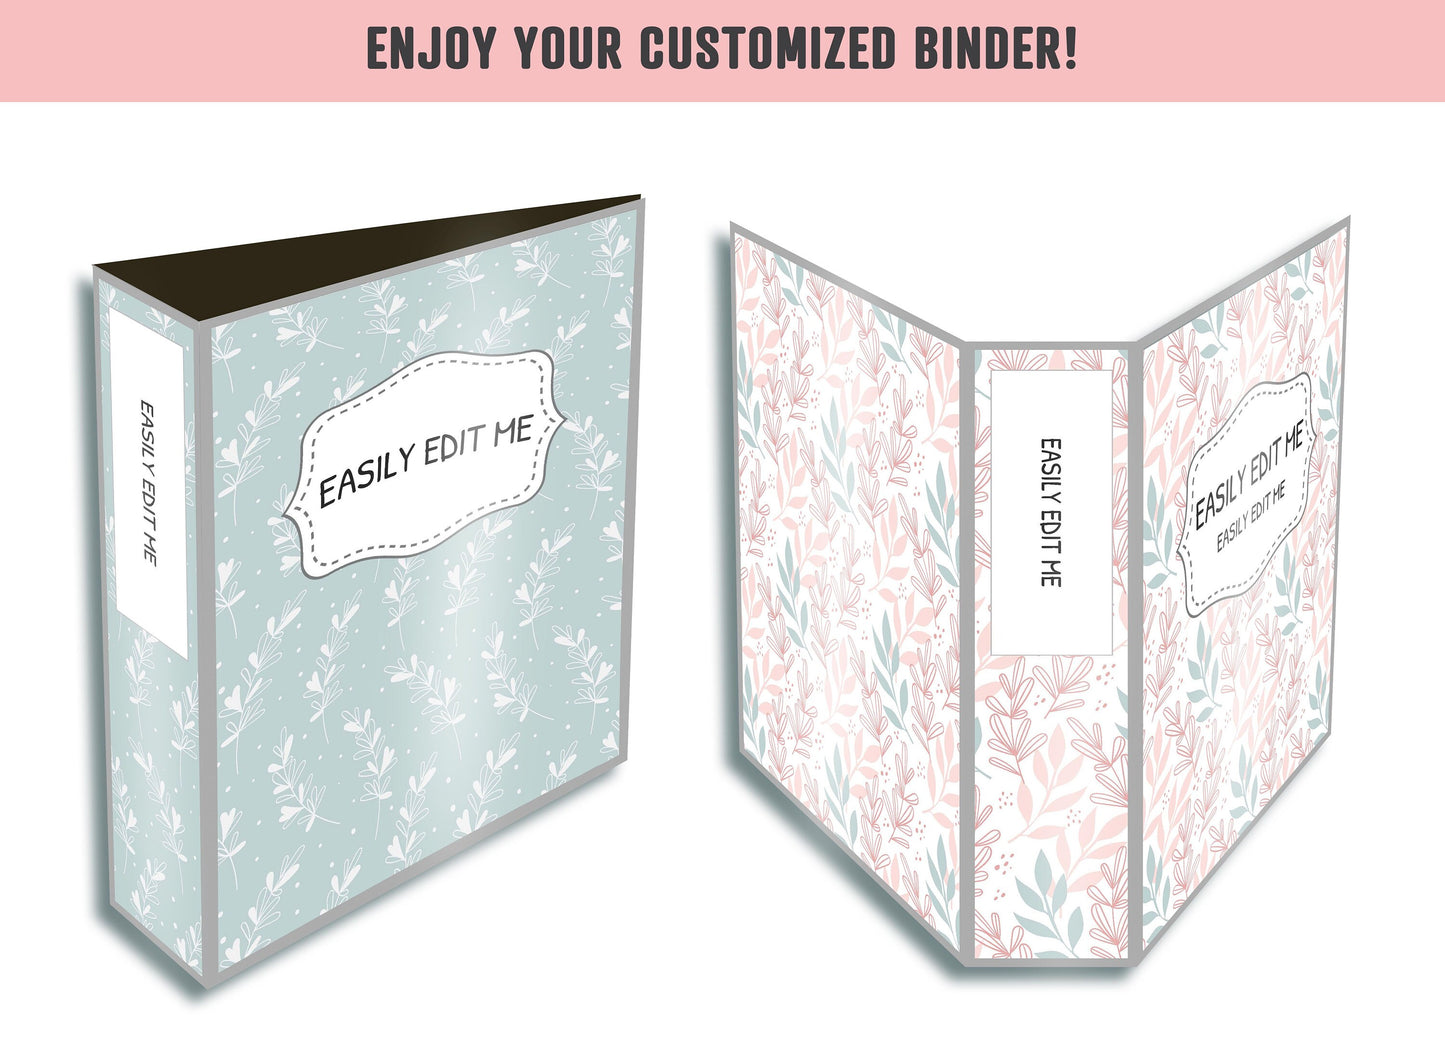 Binder Cover Set, 10 Editable Covers+Spines, Printable, Binder Cover Printable, Teacher/School Binder, Planner Cover, Binder Cover Inserts